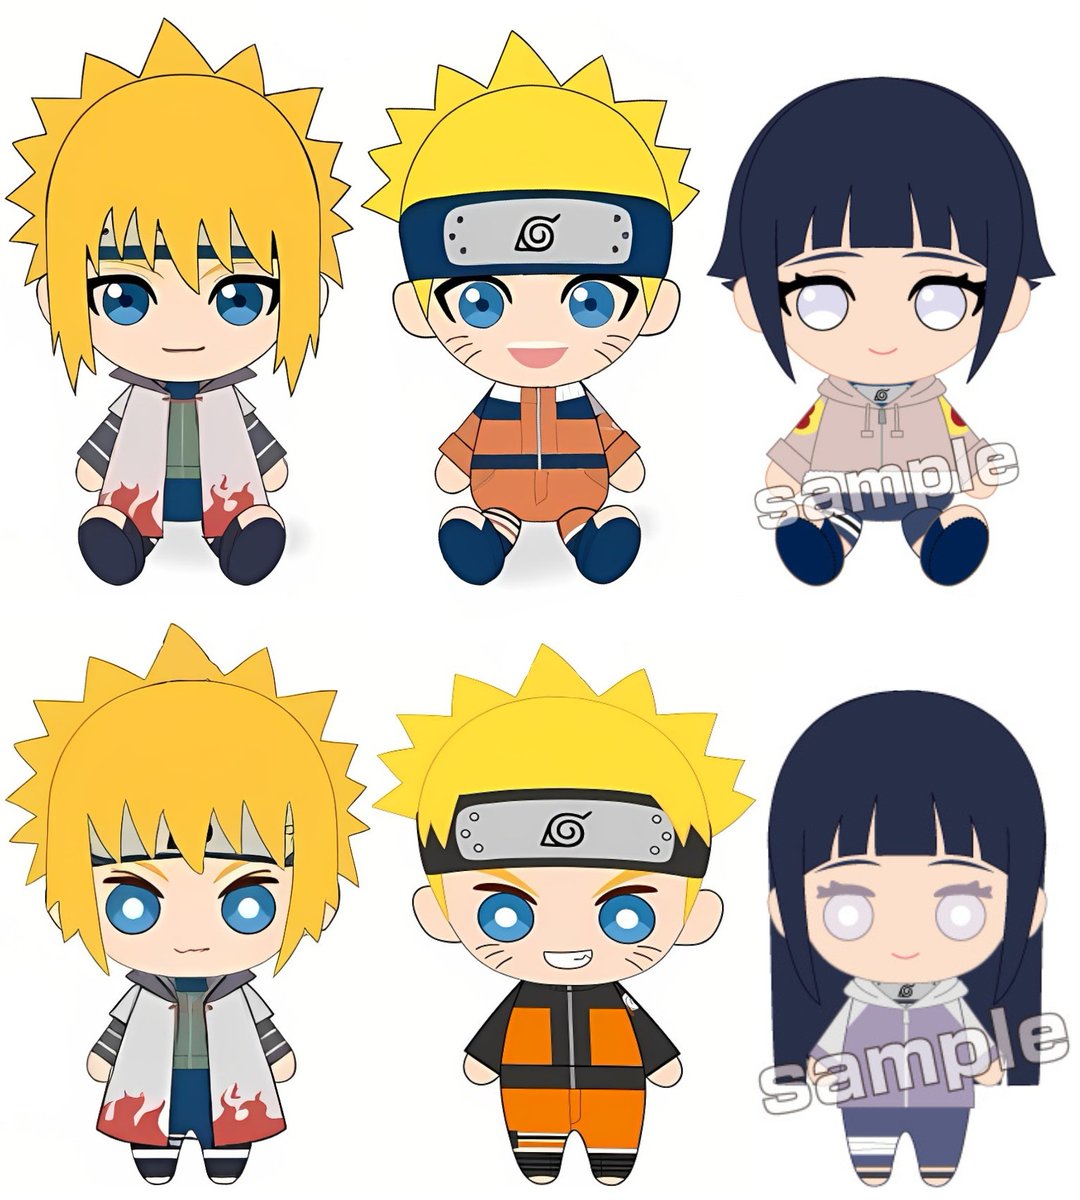 UZUMAKI FAMILY IN NARUTO & NARUTO SHIPPUDEN BALL CHAIN MASKOT PLUSHIES‼️

Hinata has recently been added. Love how we can see hers and Naruto's growth in the merch ❤️